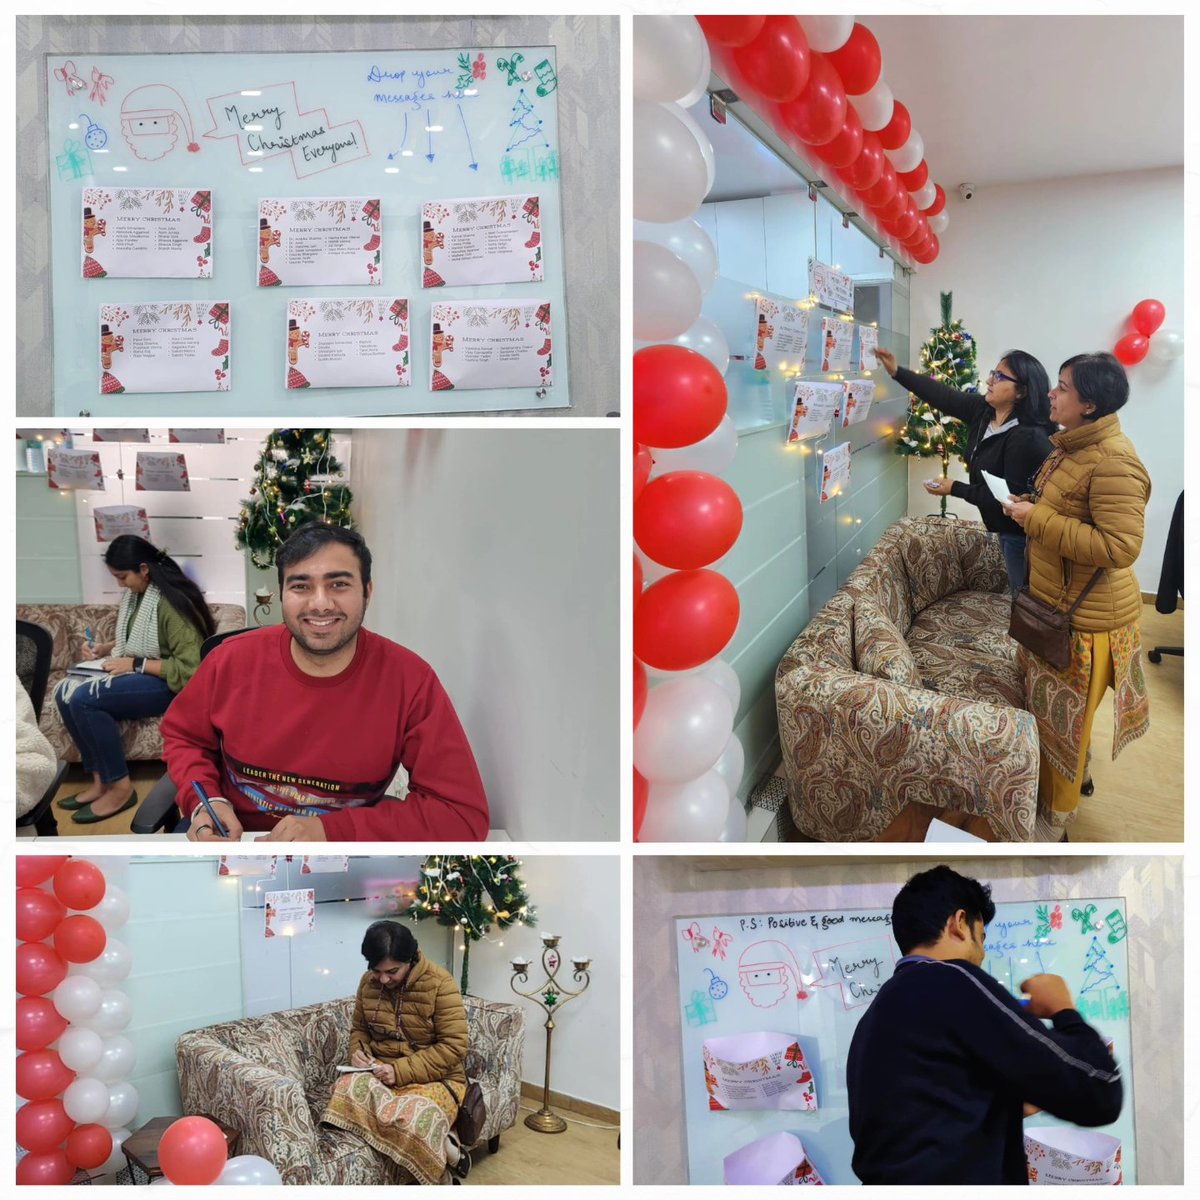 Diving into the spirit of the season with Secret Santa gift exchange. Our 'message wall' became a canvas of warm wishes from team members.Here's to spreading festive cheer in the workplace! 🌟🎄 #HolidayCelebrations #TeamSpirit #GratitudeInAction